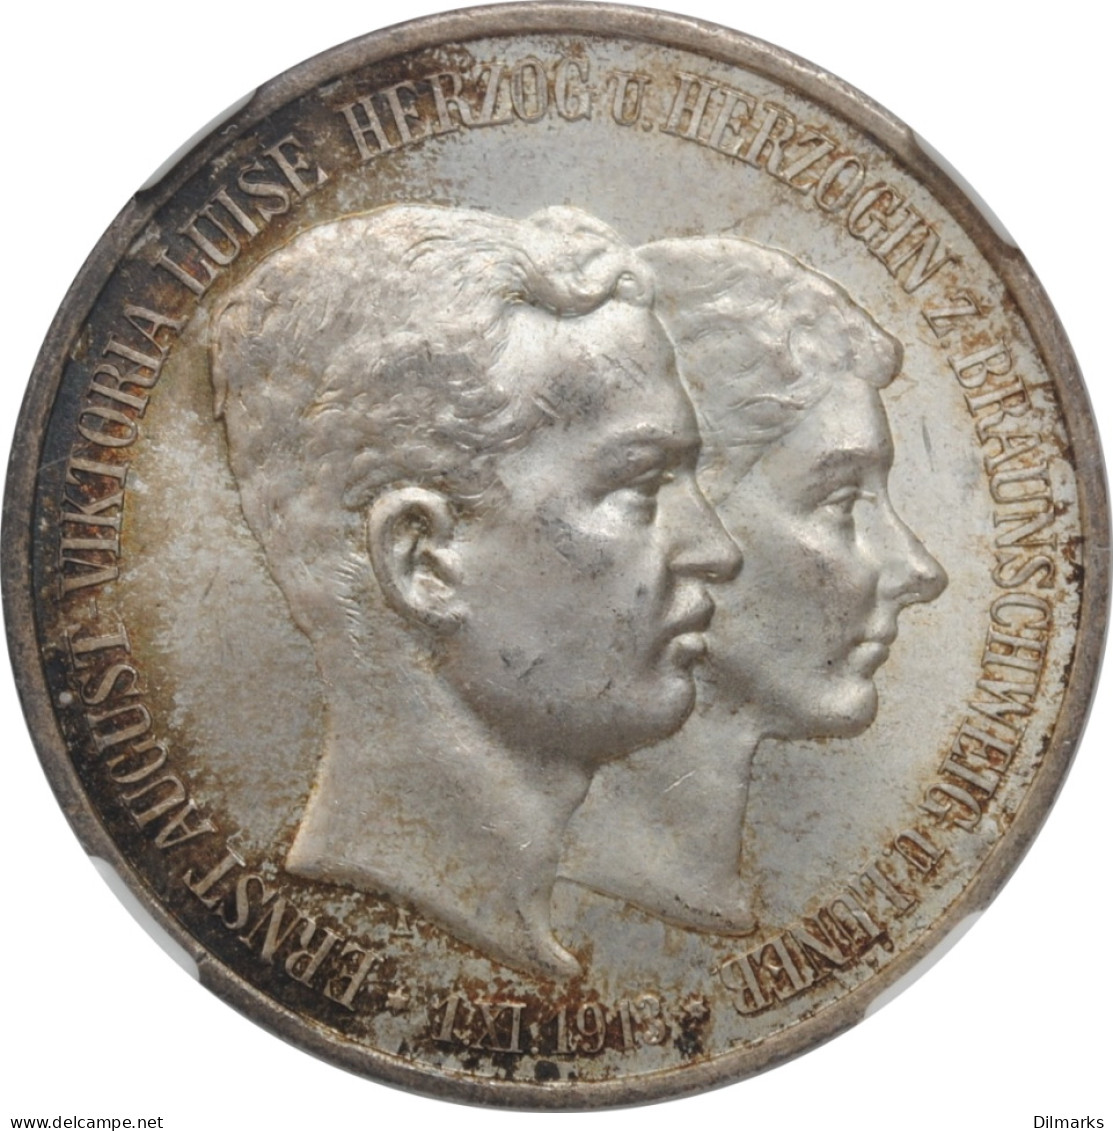 Brunswick-Wolfenbuttel 3 Mark 1915, NGC MS64, &quot;Ernst August Wedding &amp; Accession&quot; - 2, 3 & 5 Mark Silver